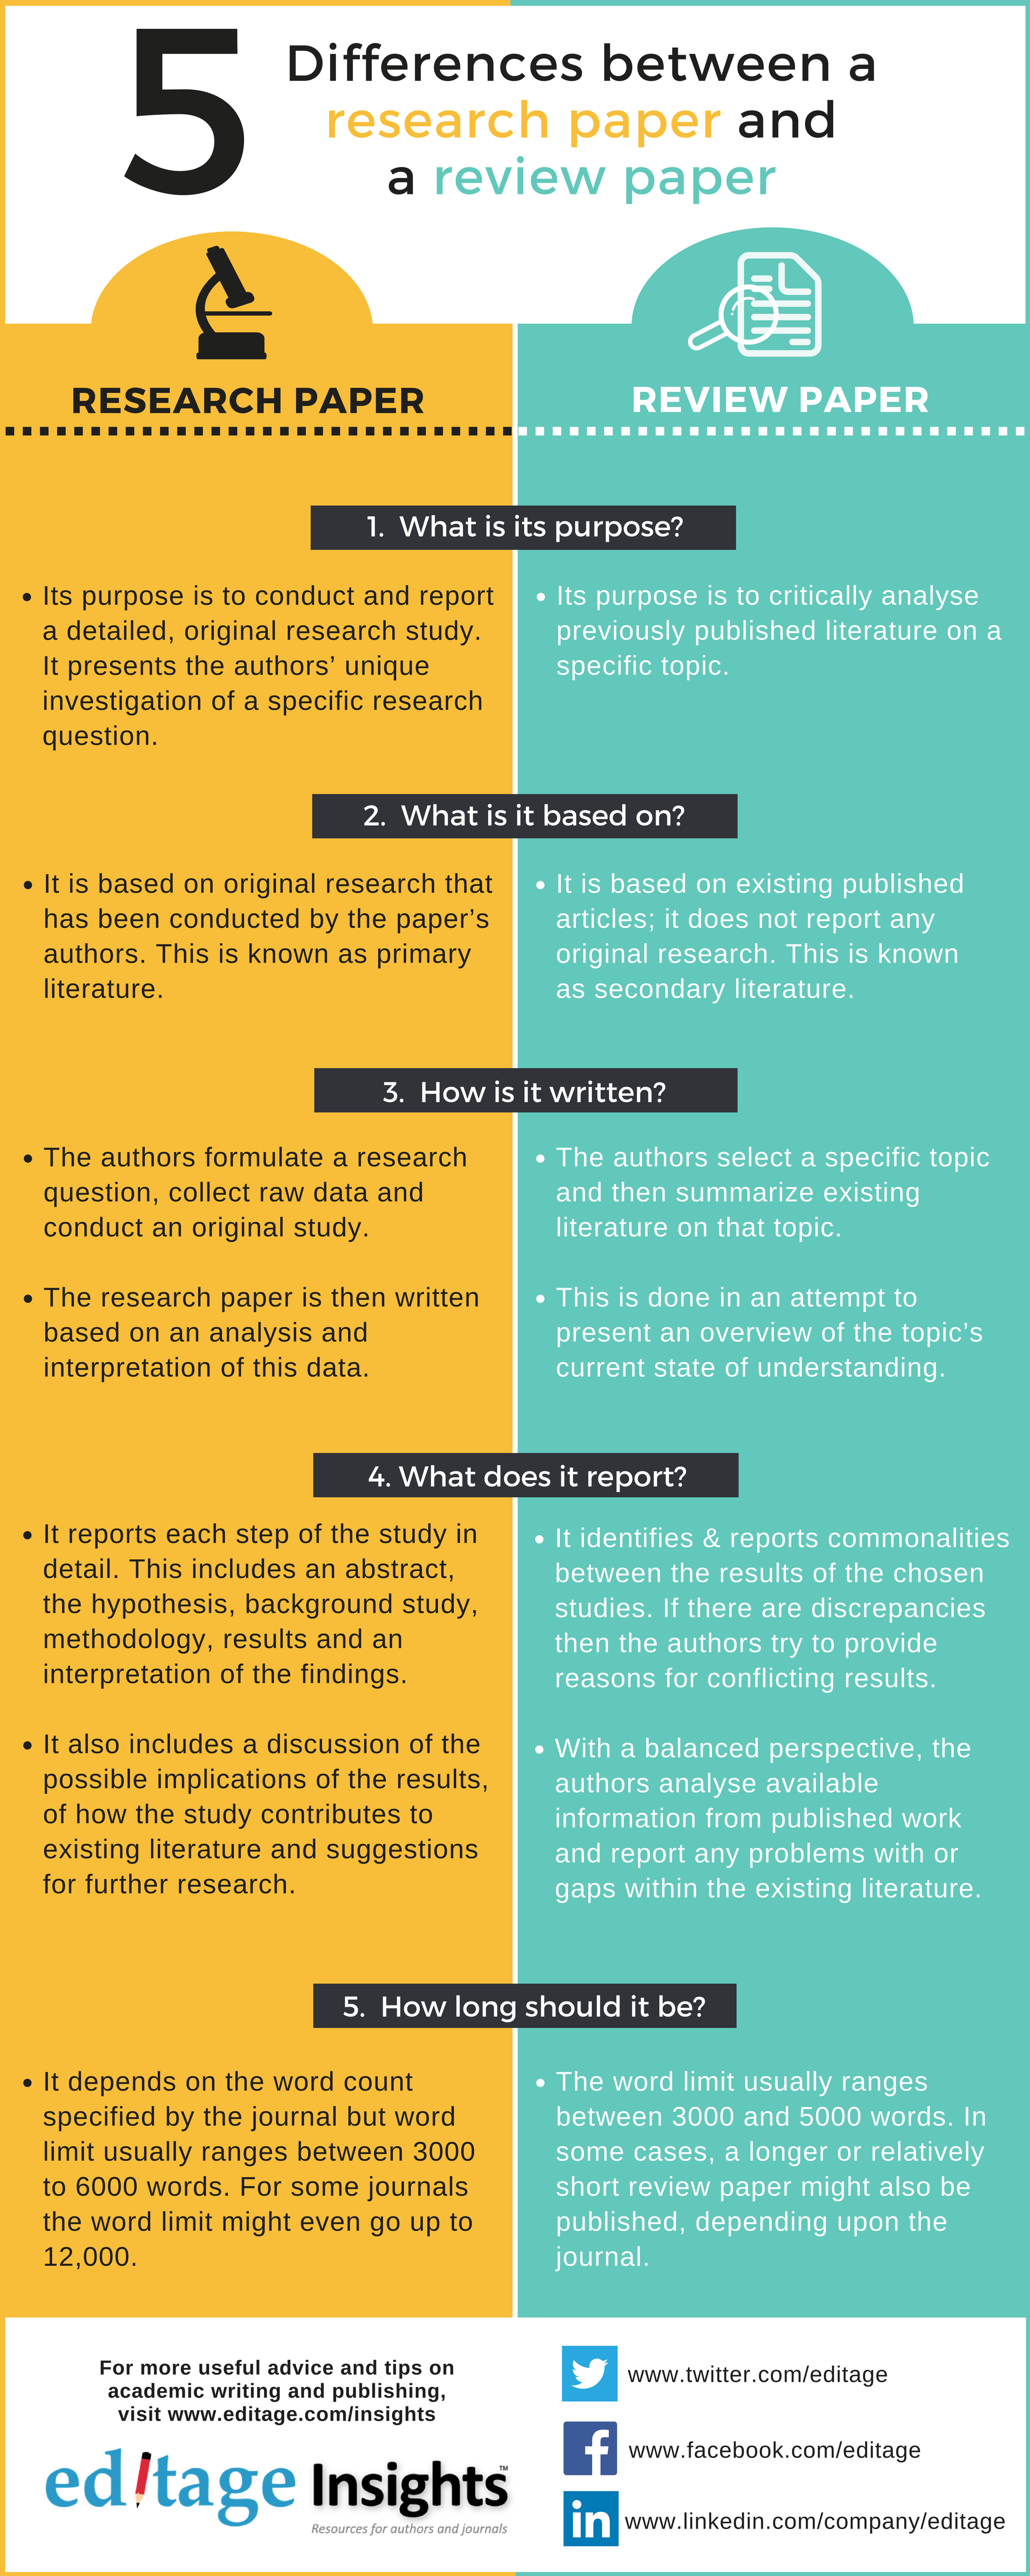 Thesis or dissertation difference